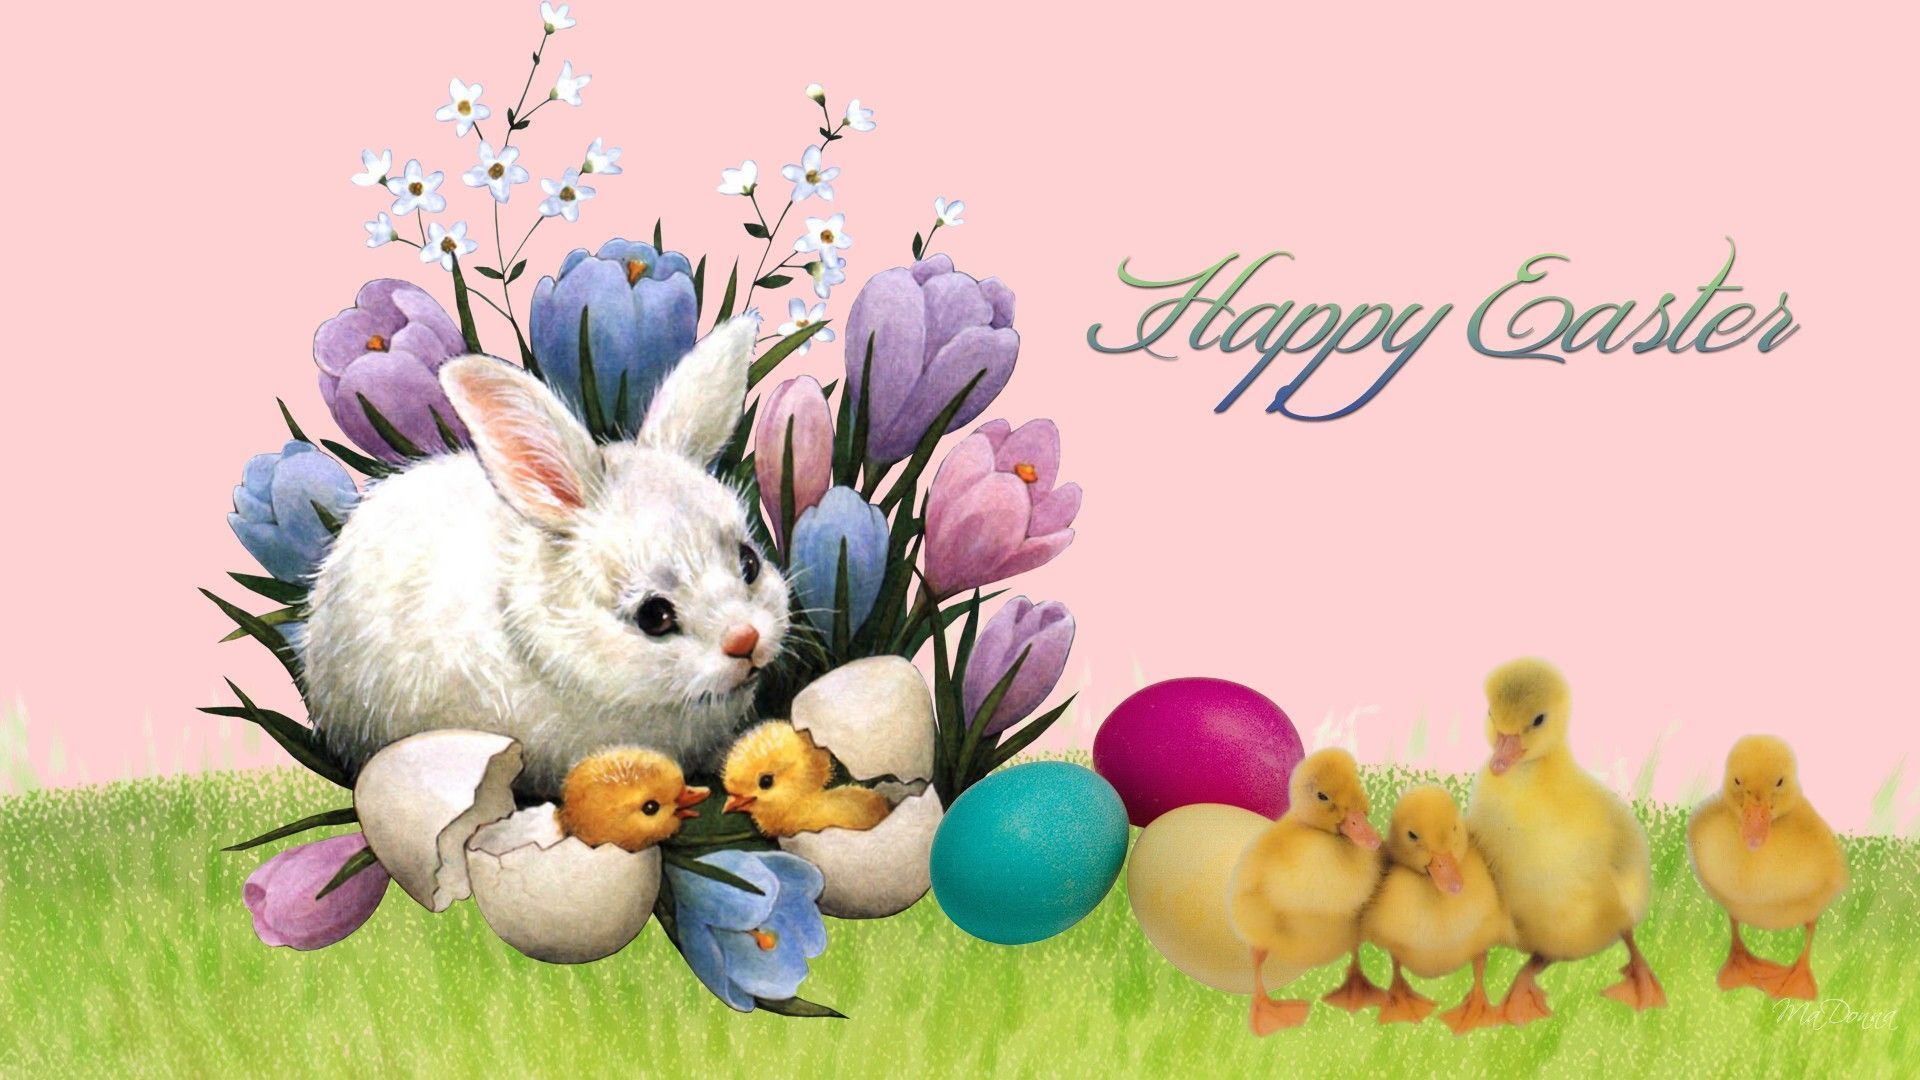 Easter Bunny HD Wallpaper Free. Happy easter wallpaper, Easter wallpaper, Easter bunny picture